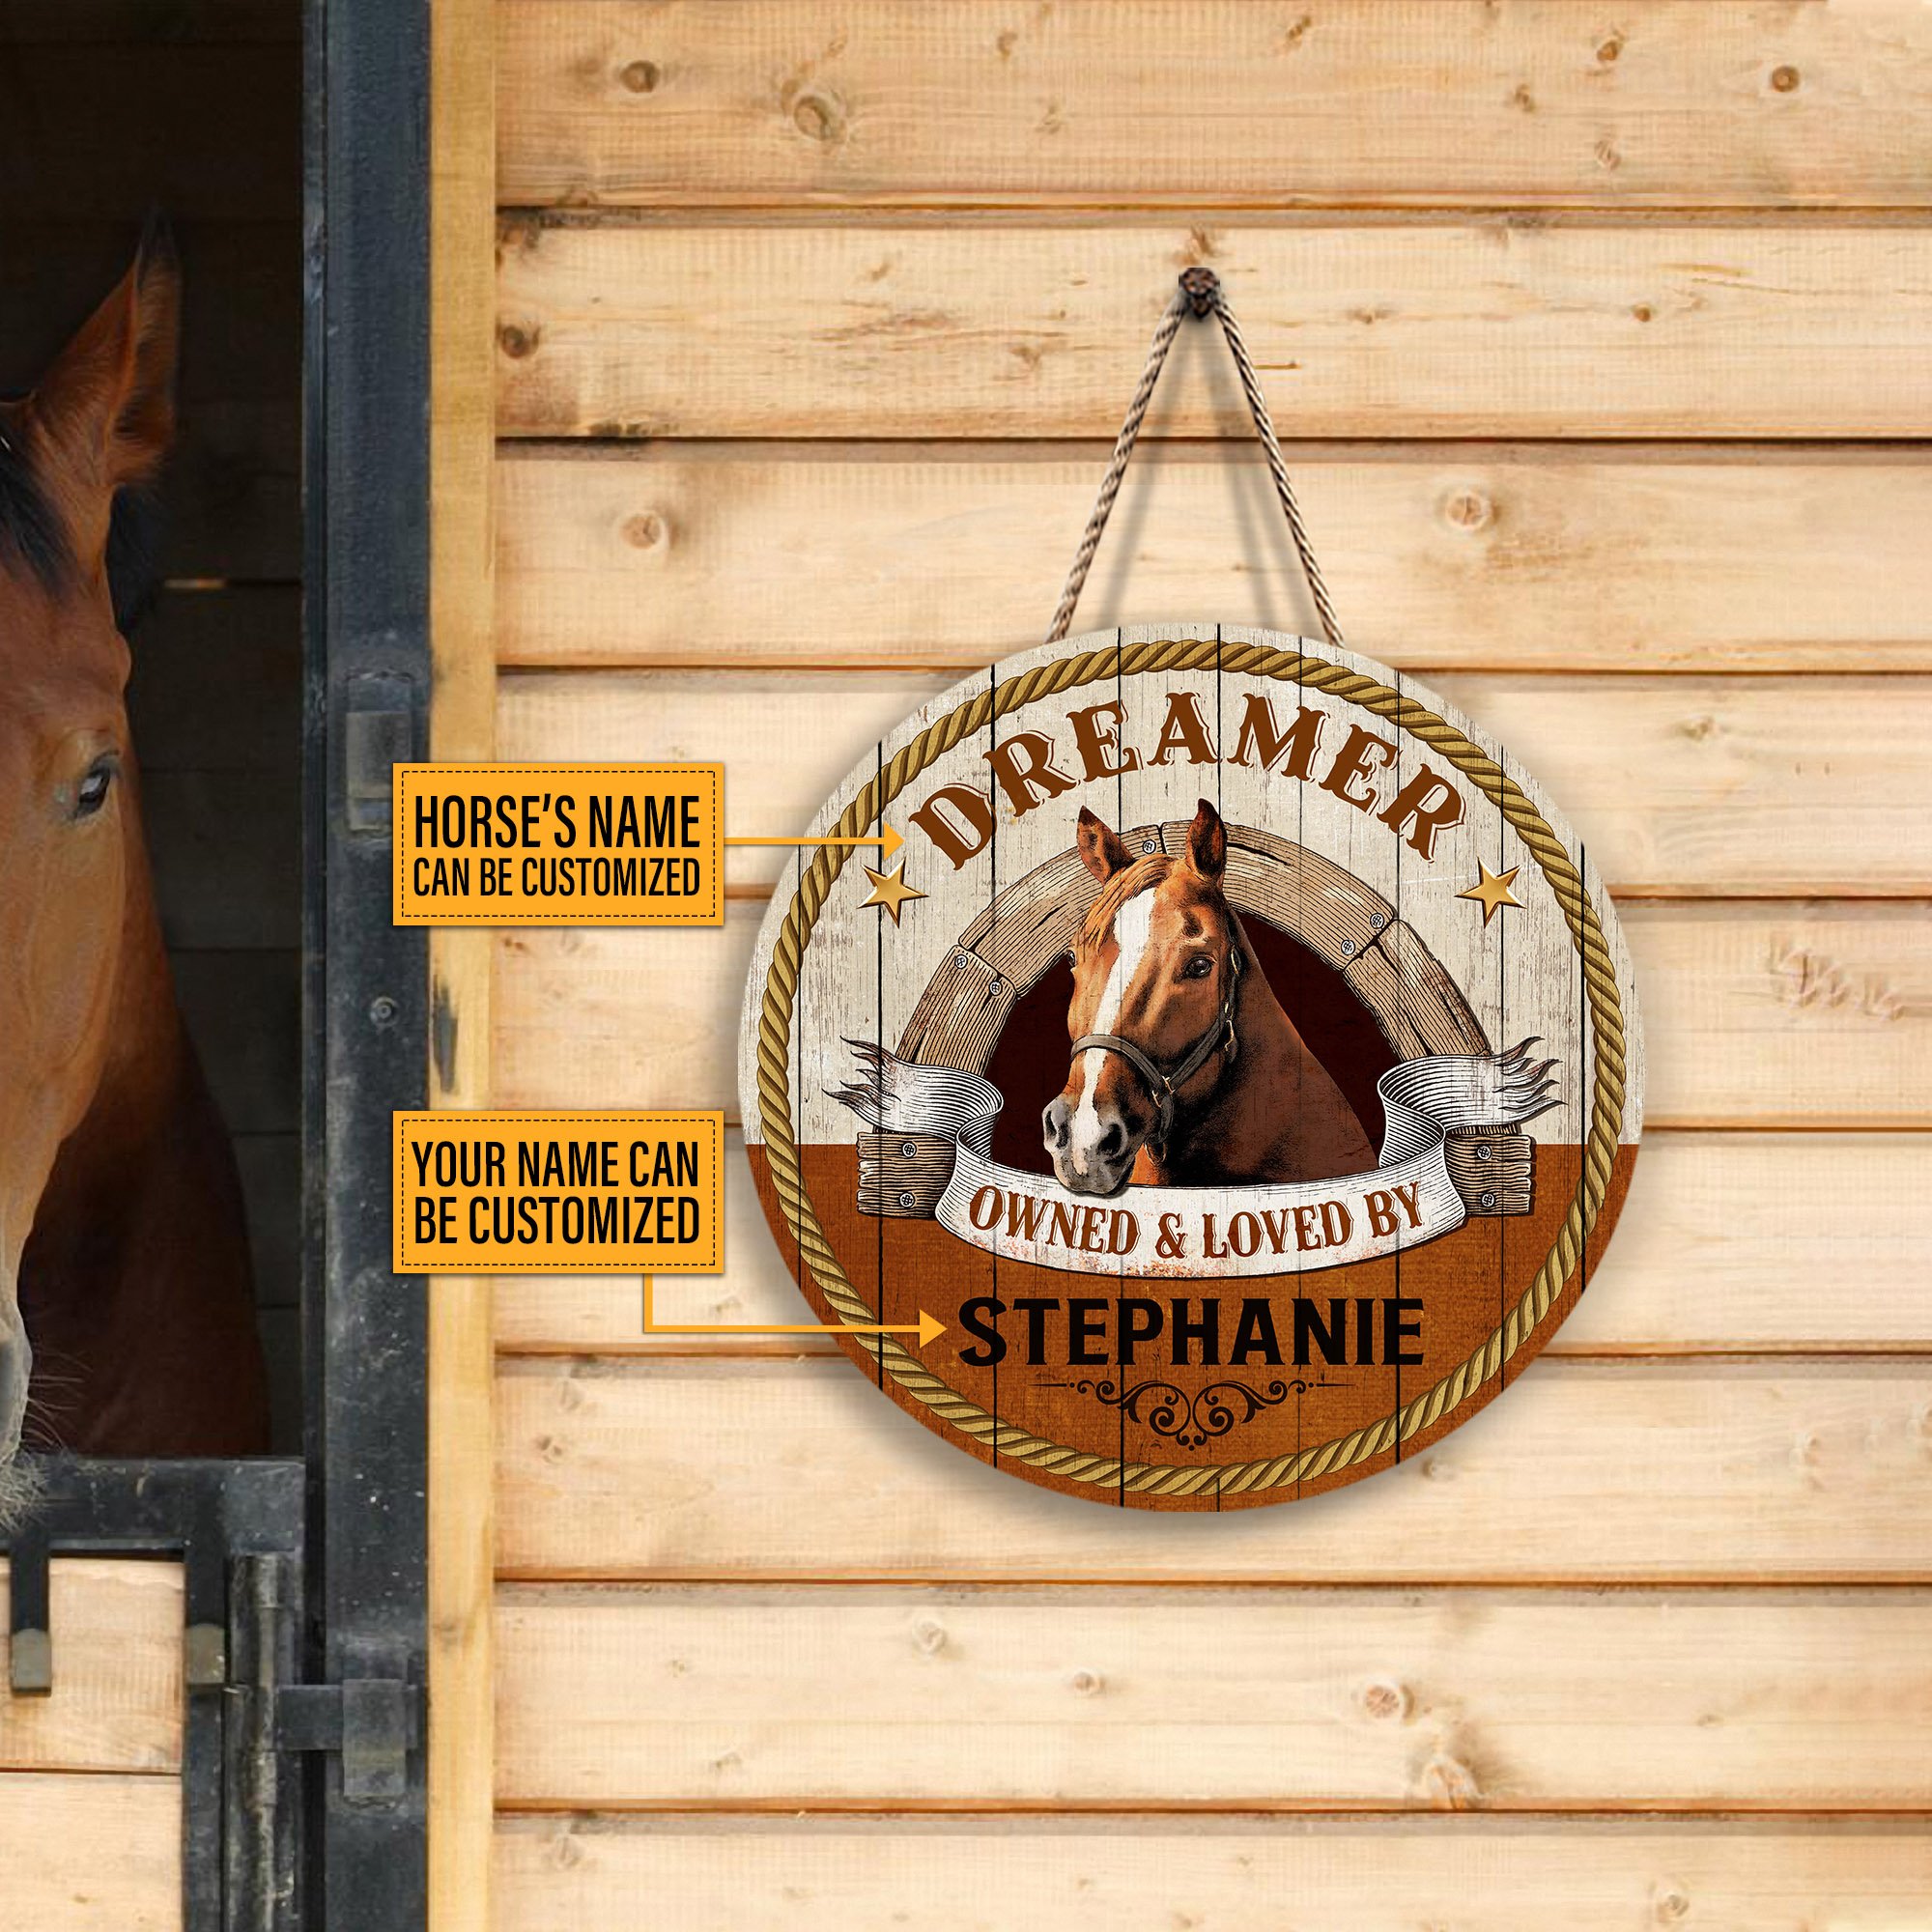 Personalized Horse Owned And Loved Customized Wood Circle Sign